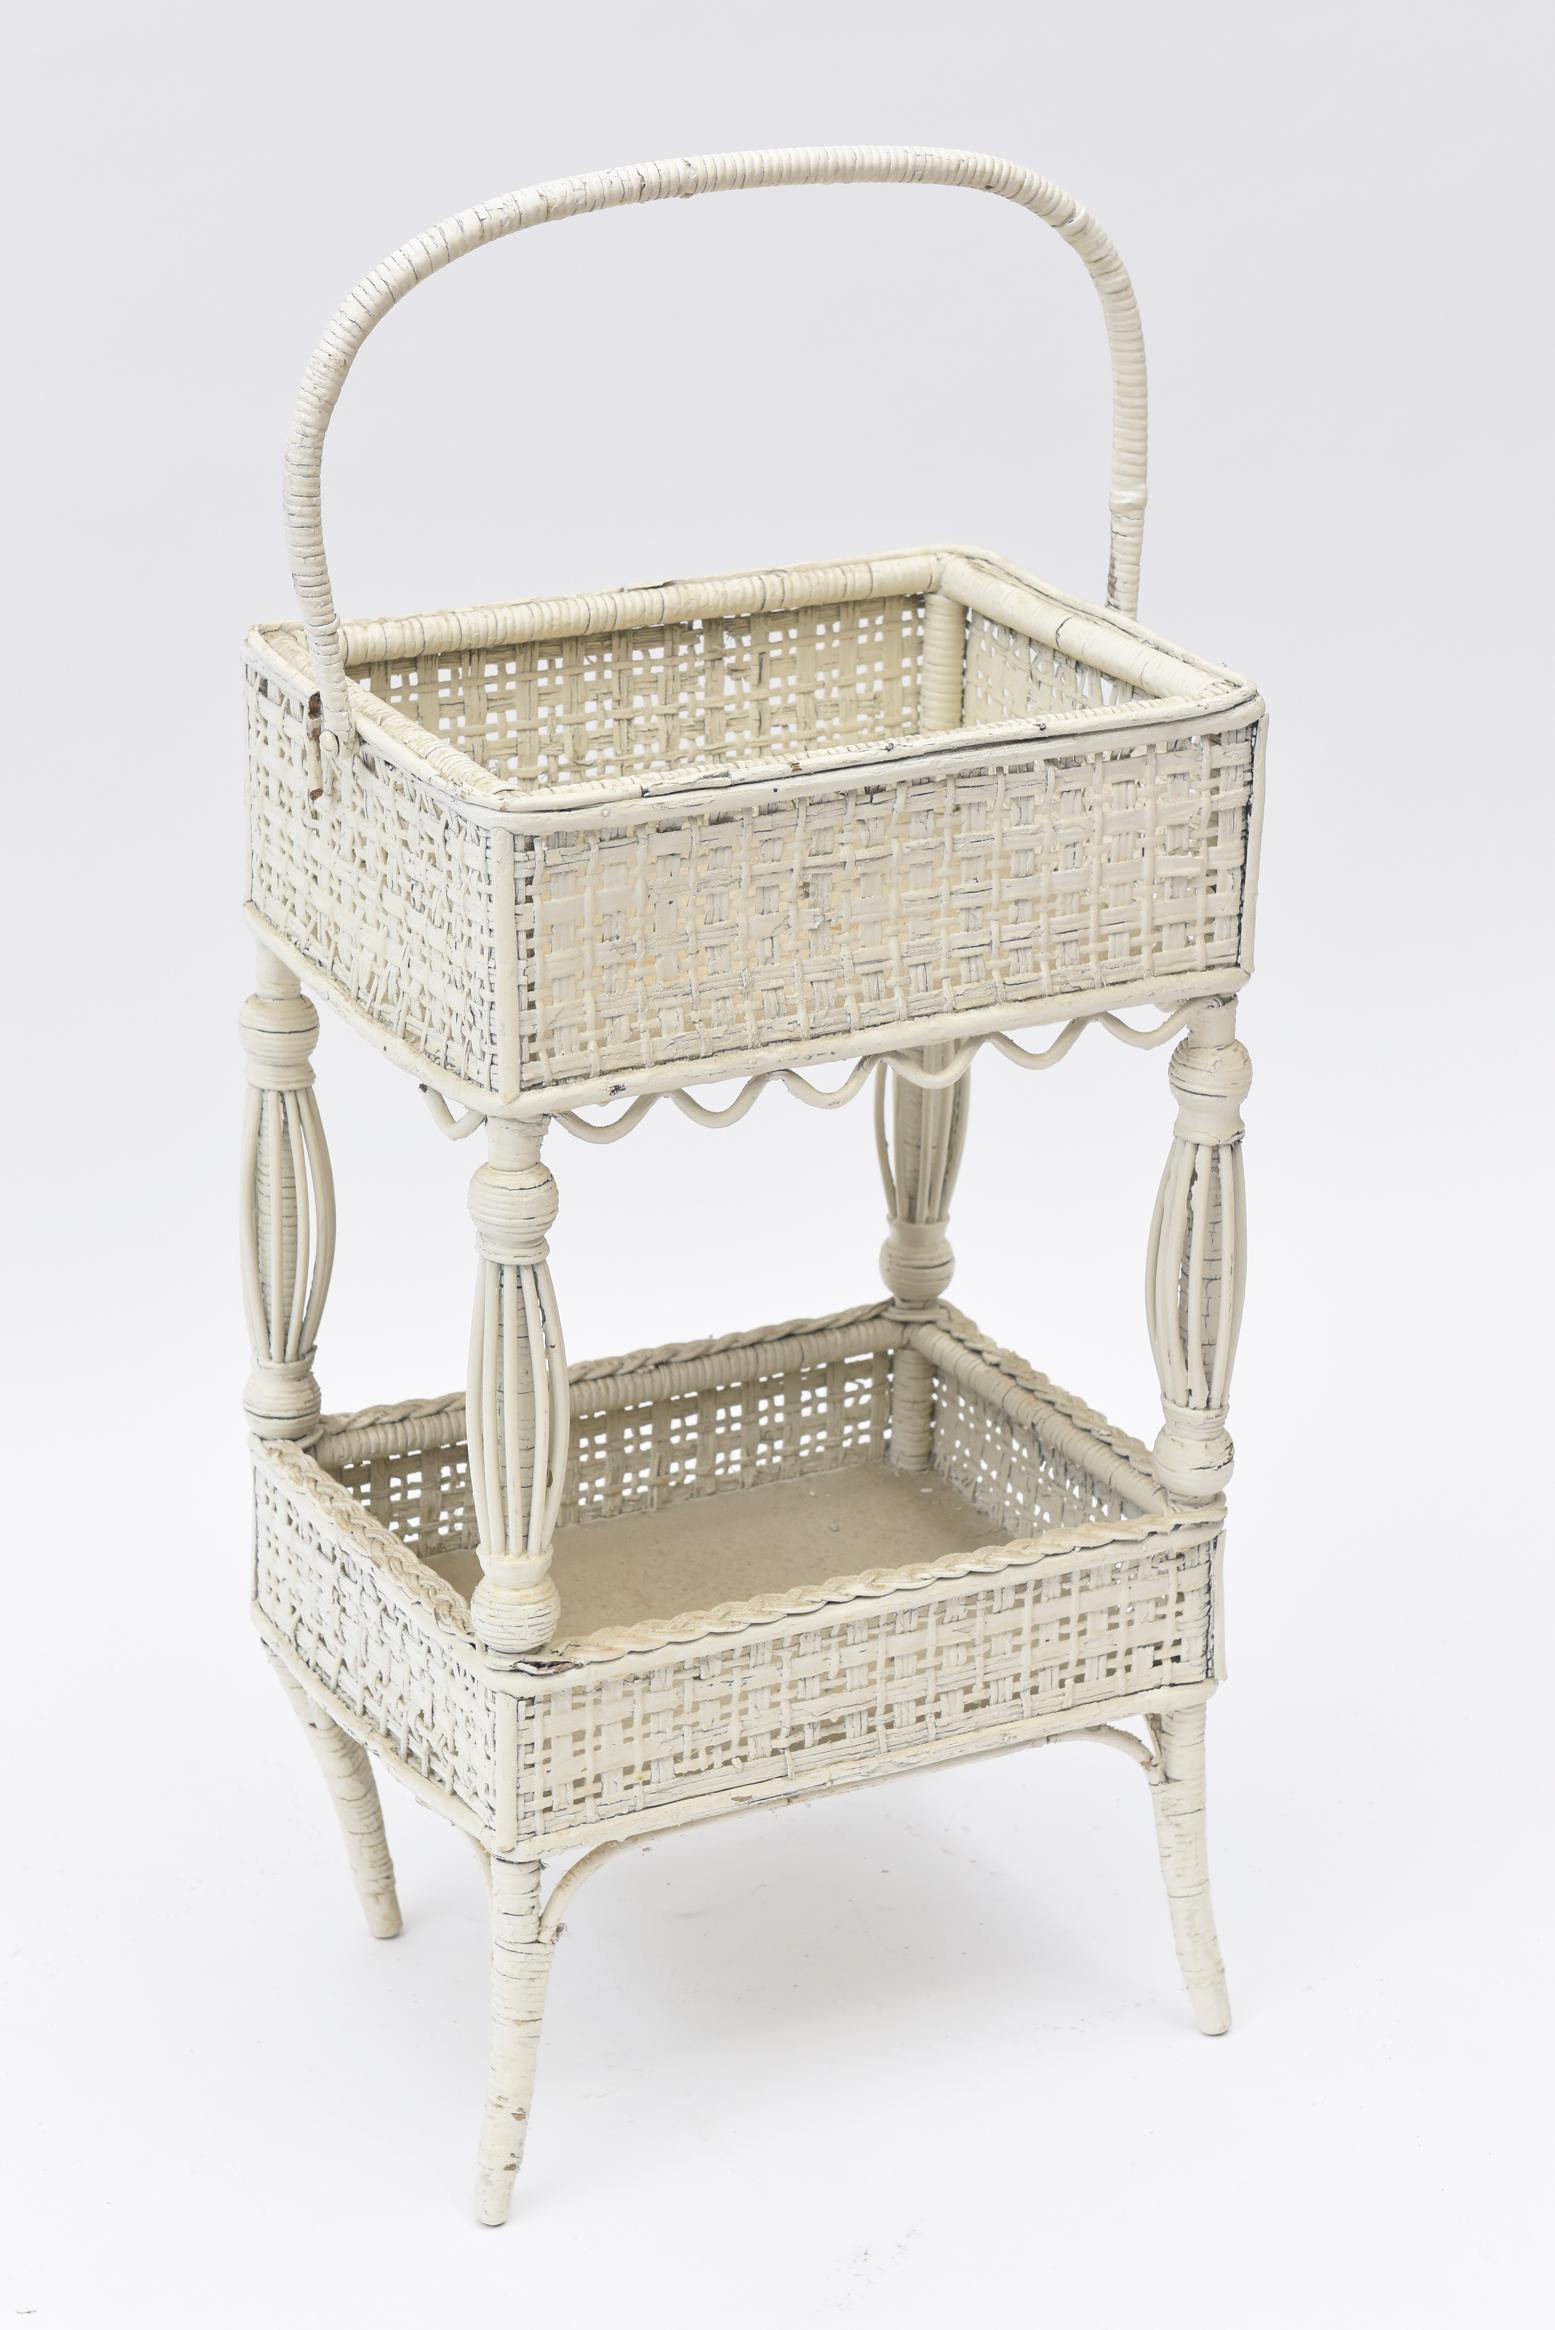 American Victorian Wicker Open Sewing Stand with Work Basket below